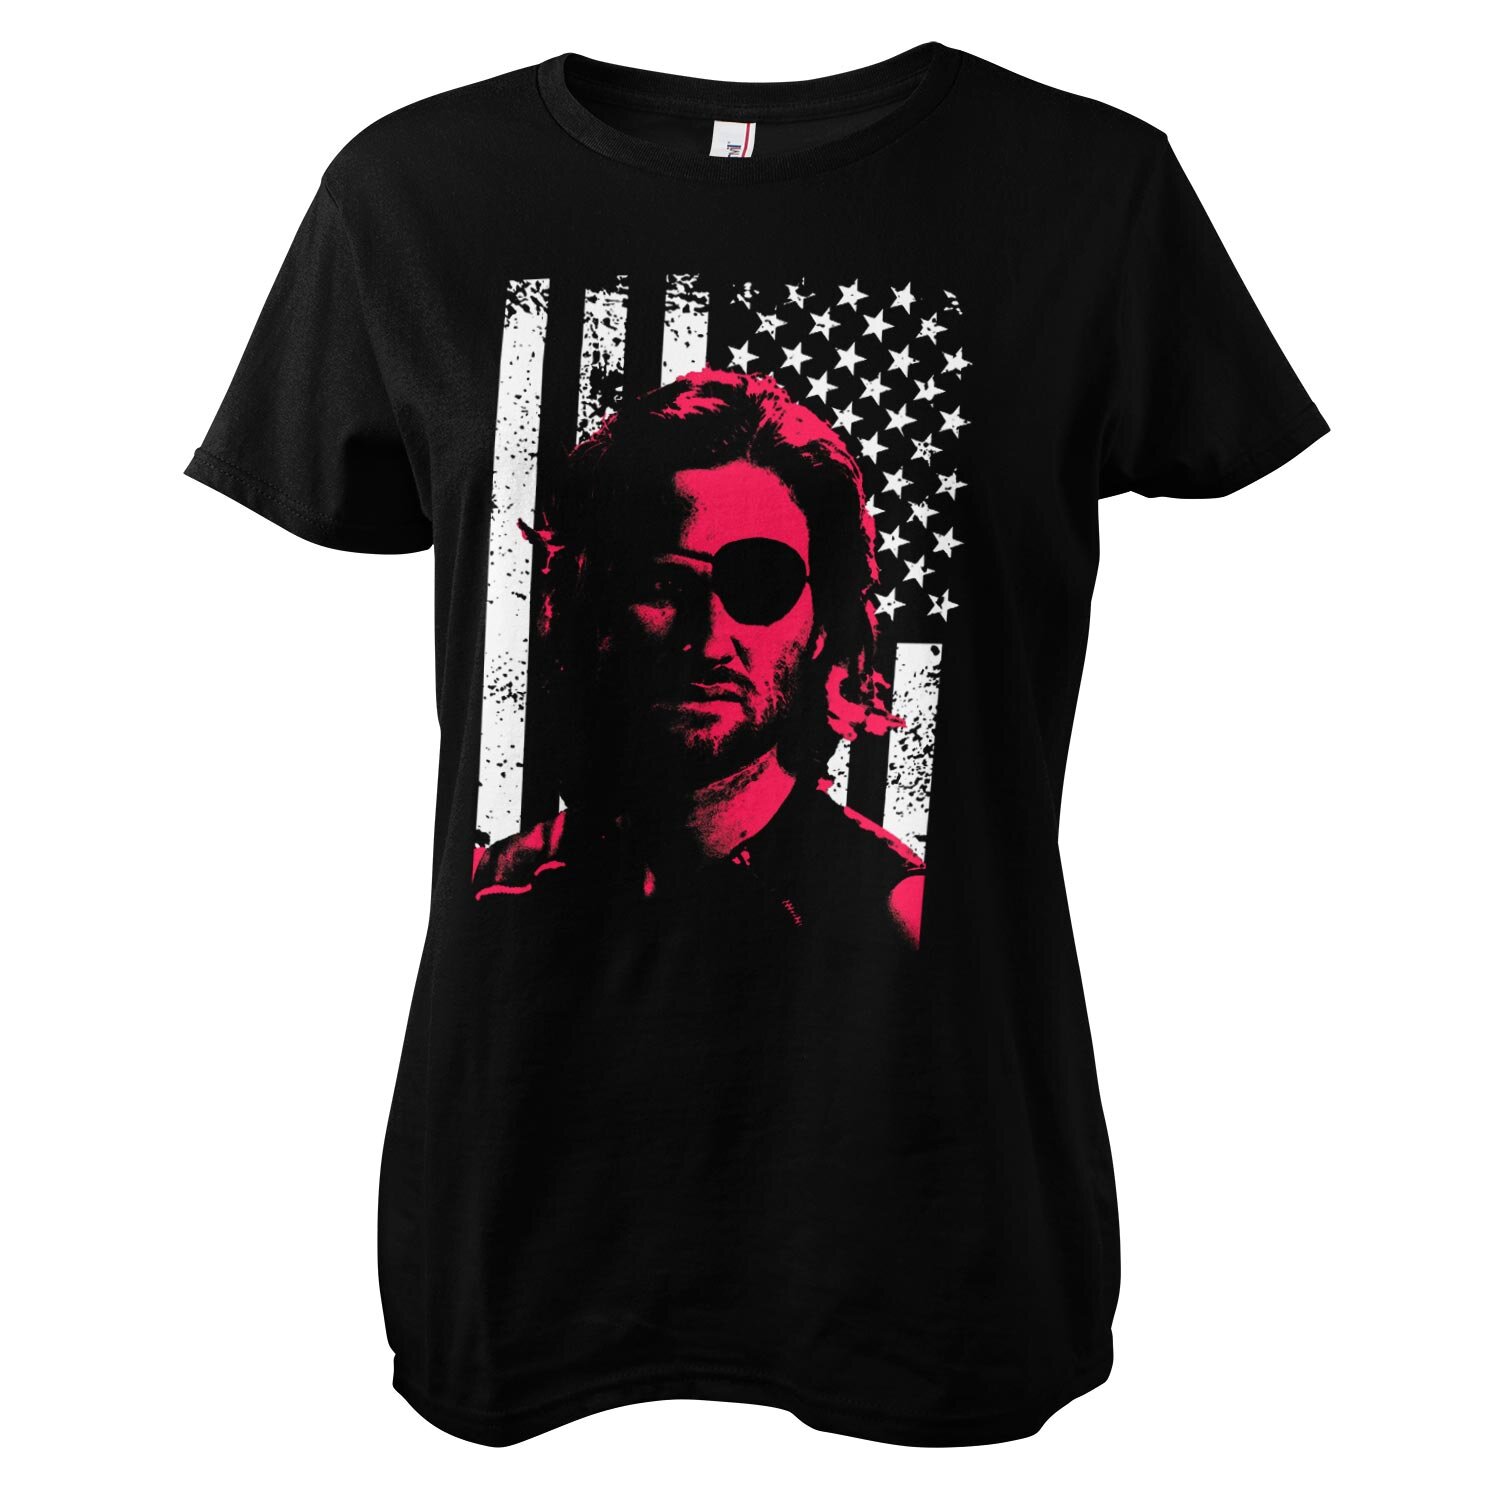 Plissken Stars and Stripes Girly Tee